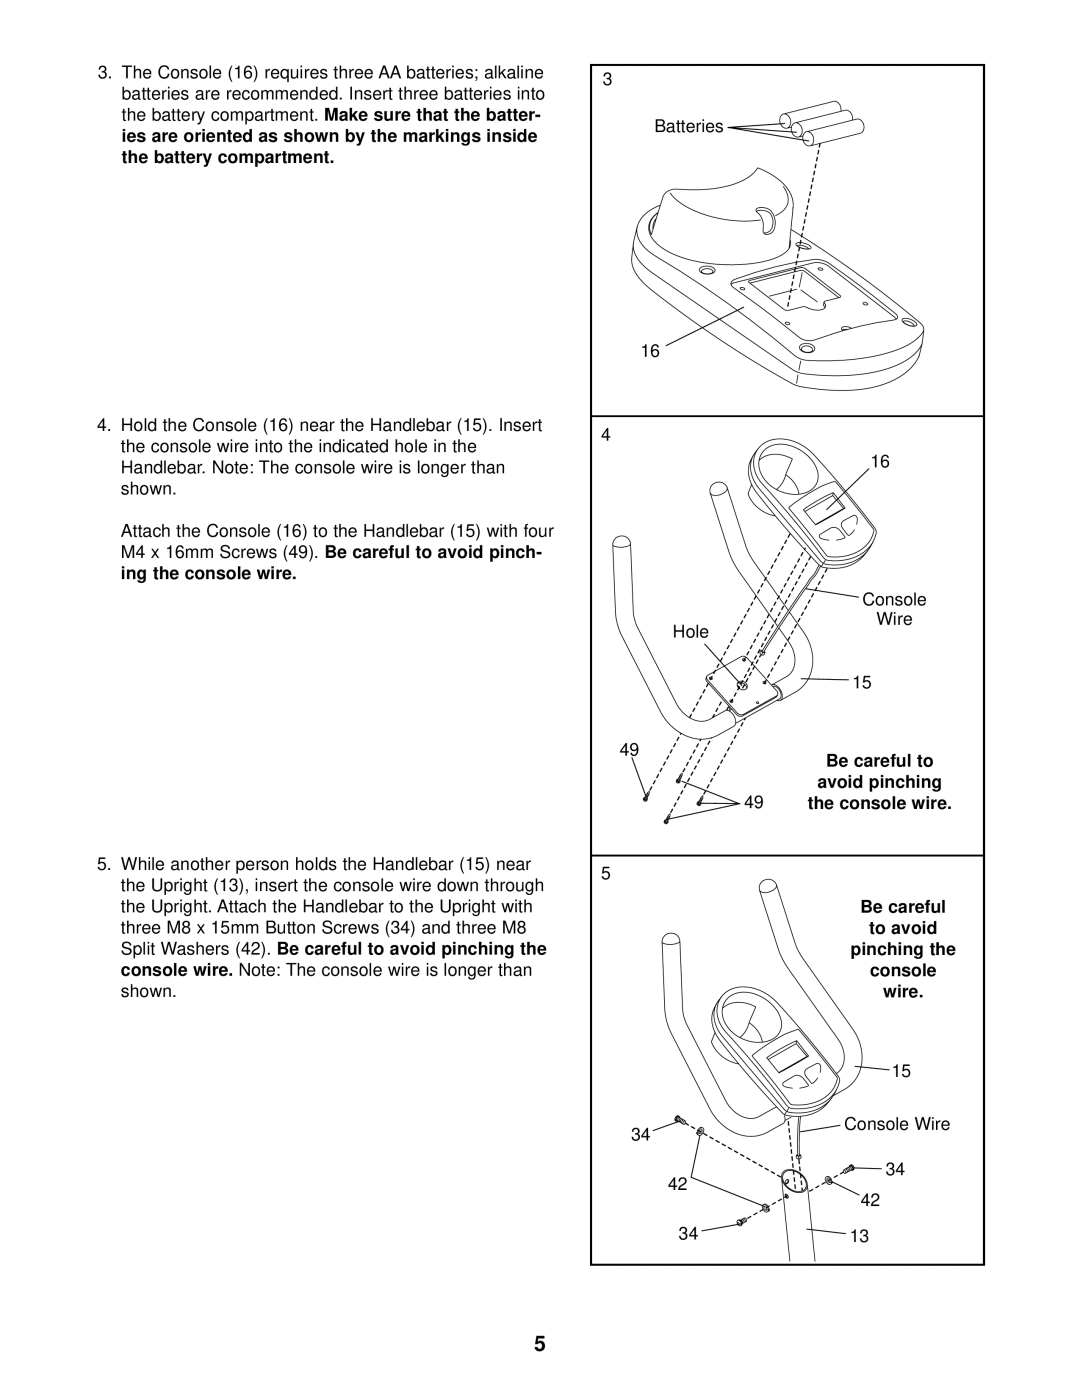 Weslo 310 CS user manual the battery compartment, Split Washers 42. Be careful to avoid pinching the, wire 